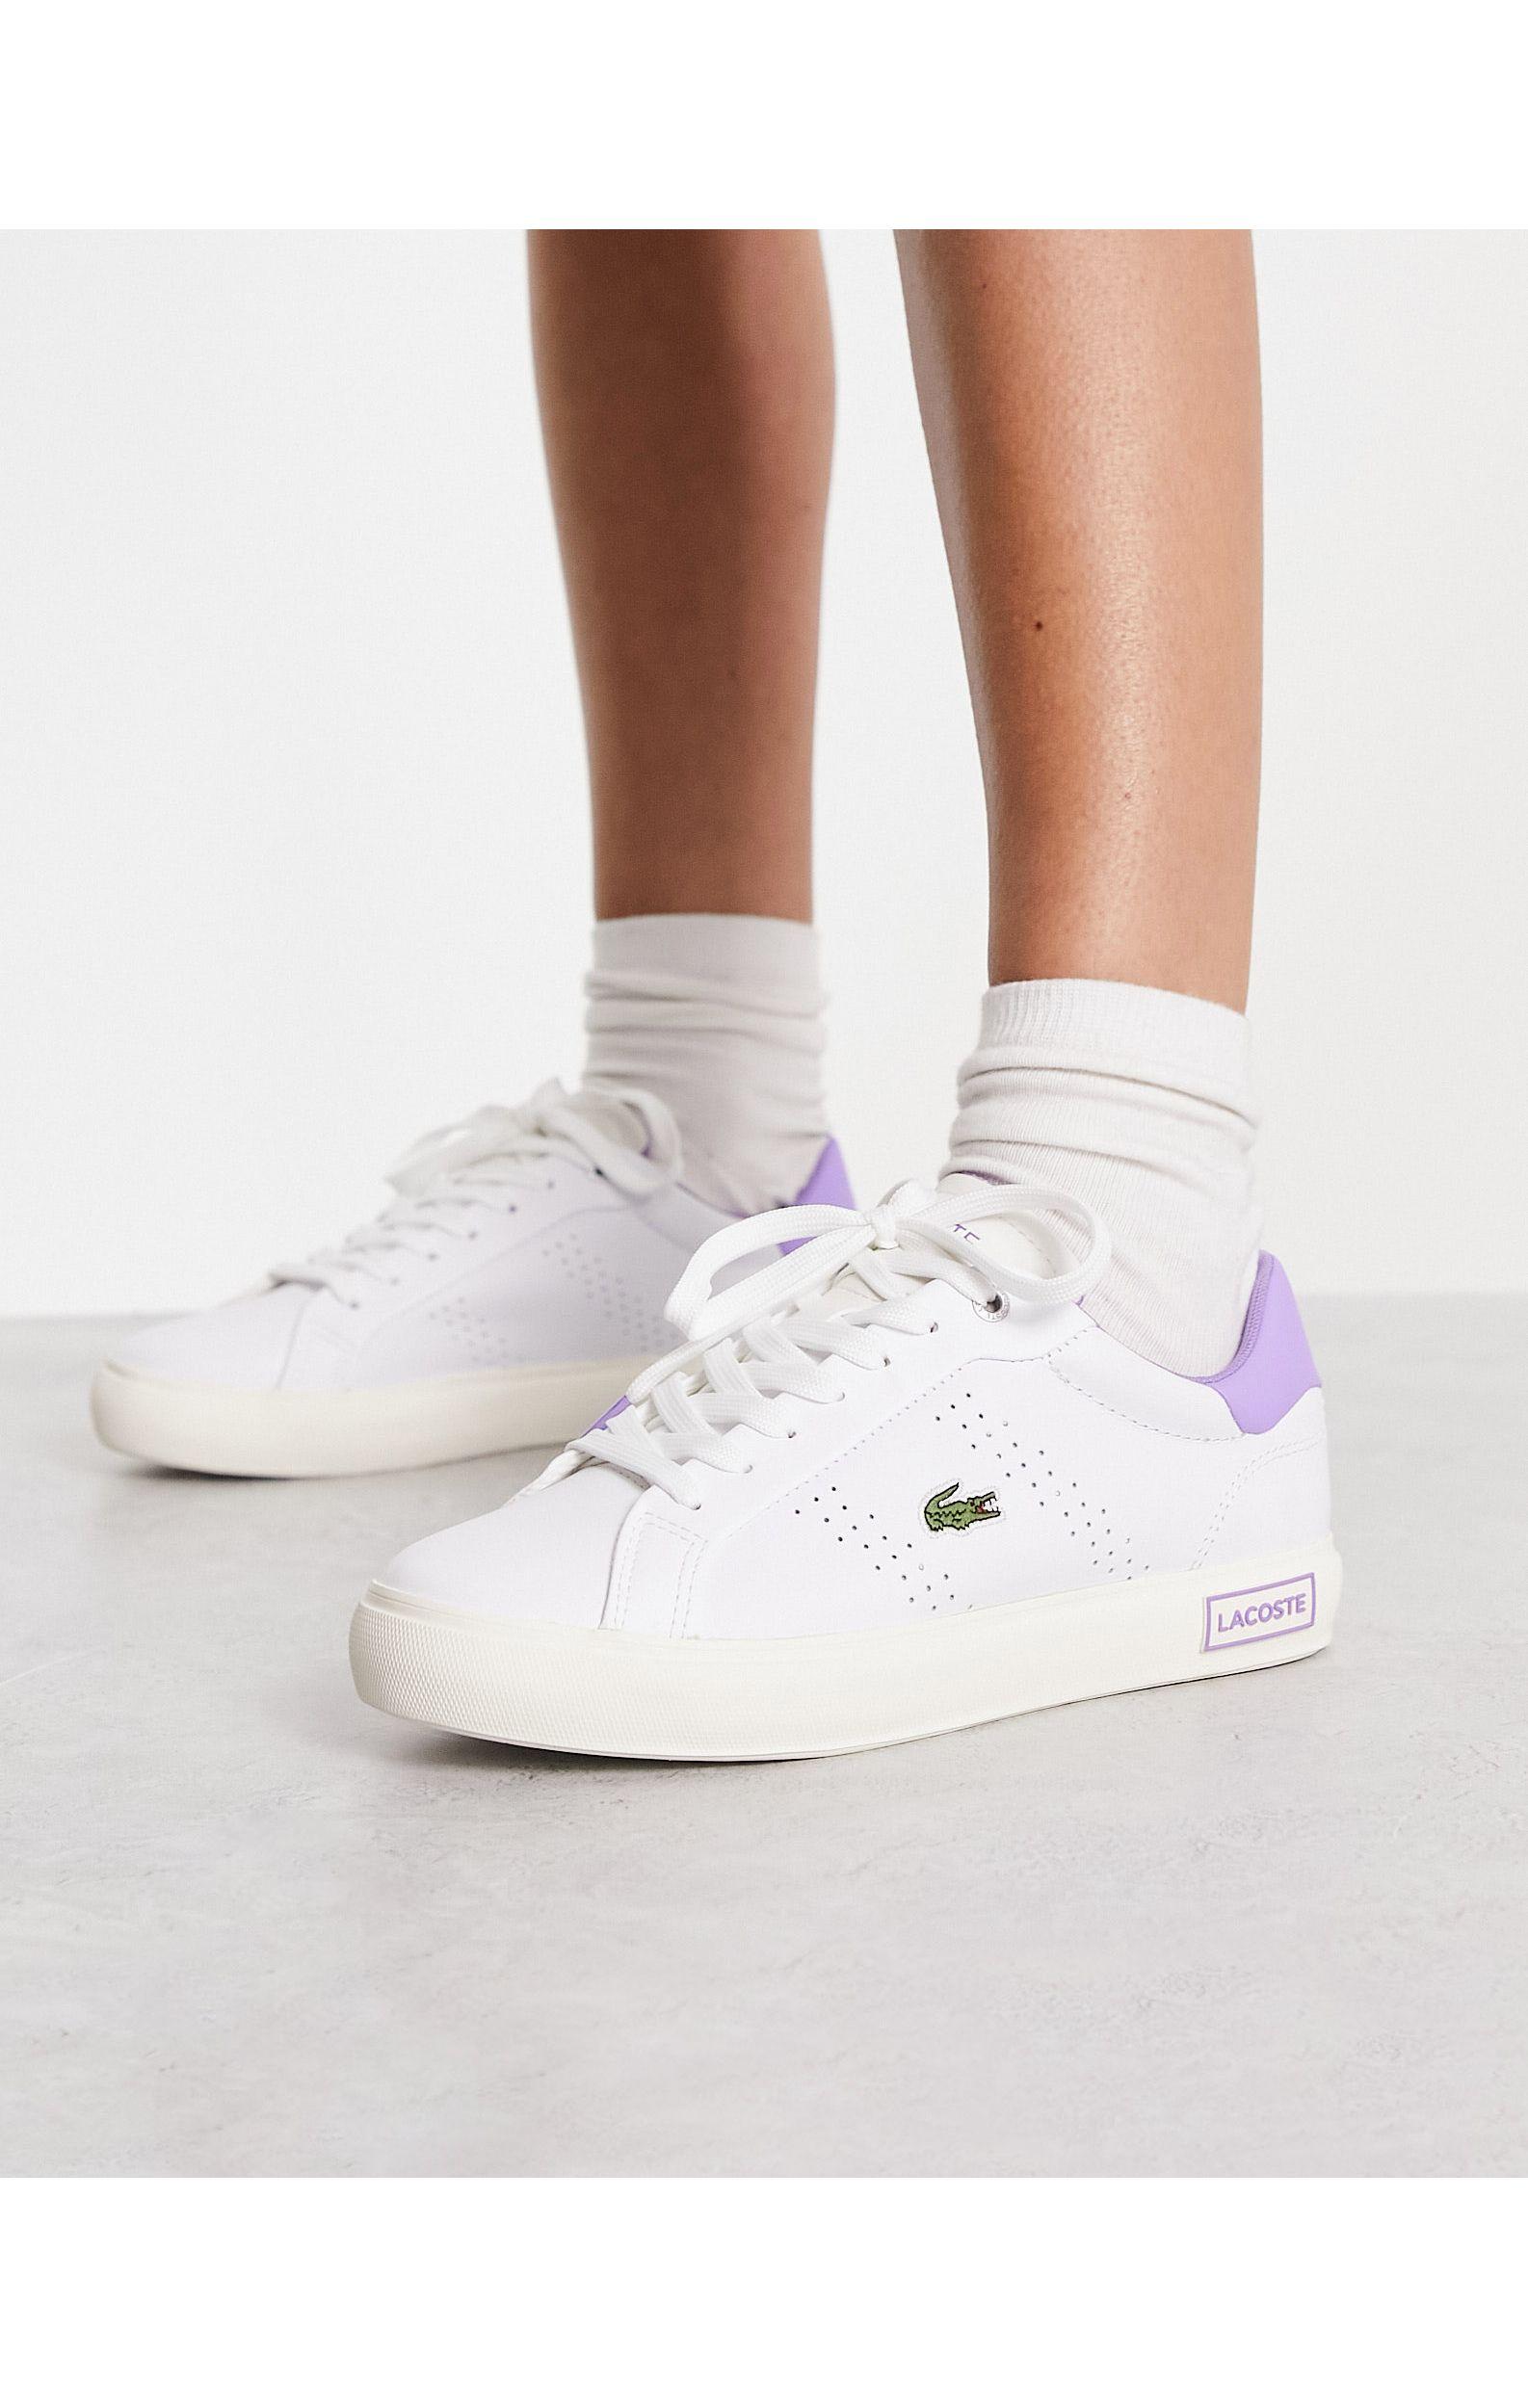 Lacoste Powercourt 2.0 Leather Trainers With Purple Back Tab in White | Lyst